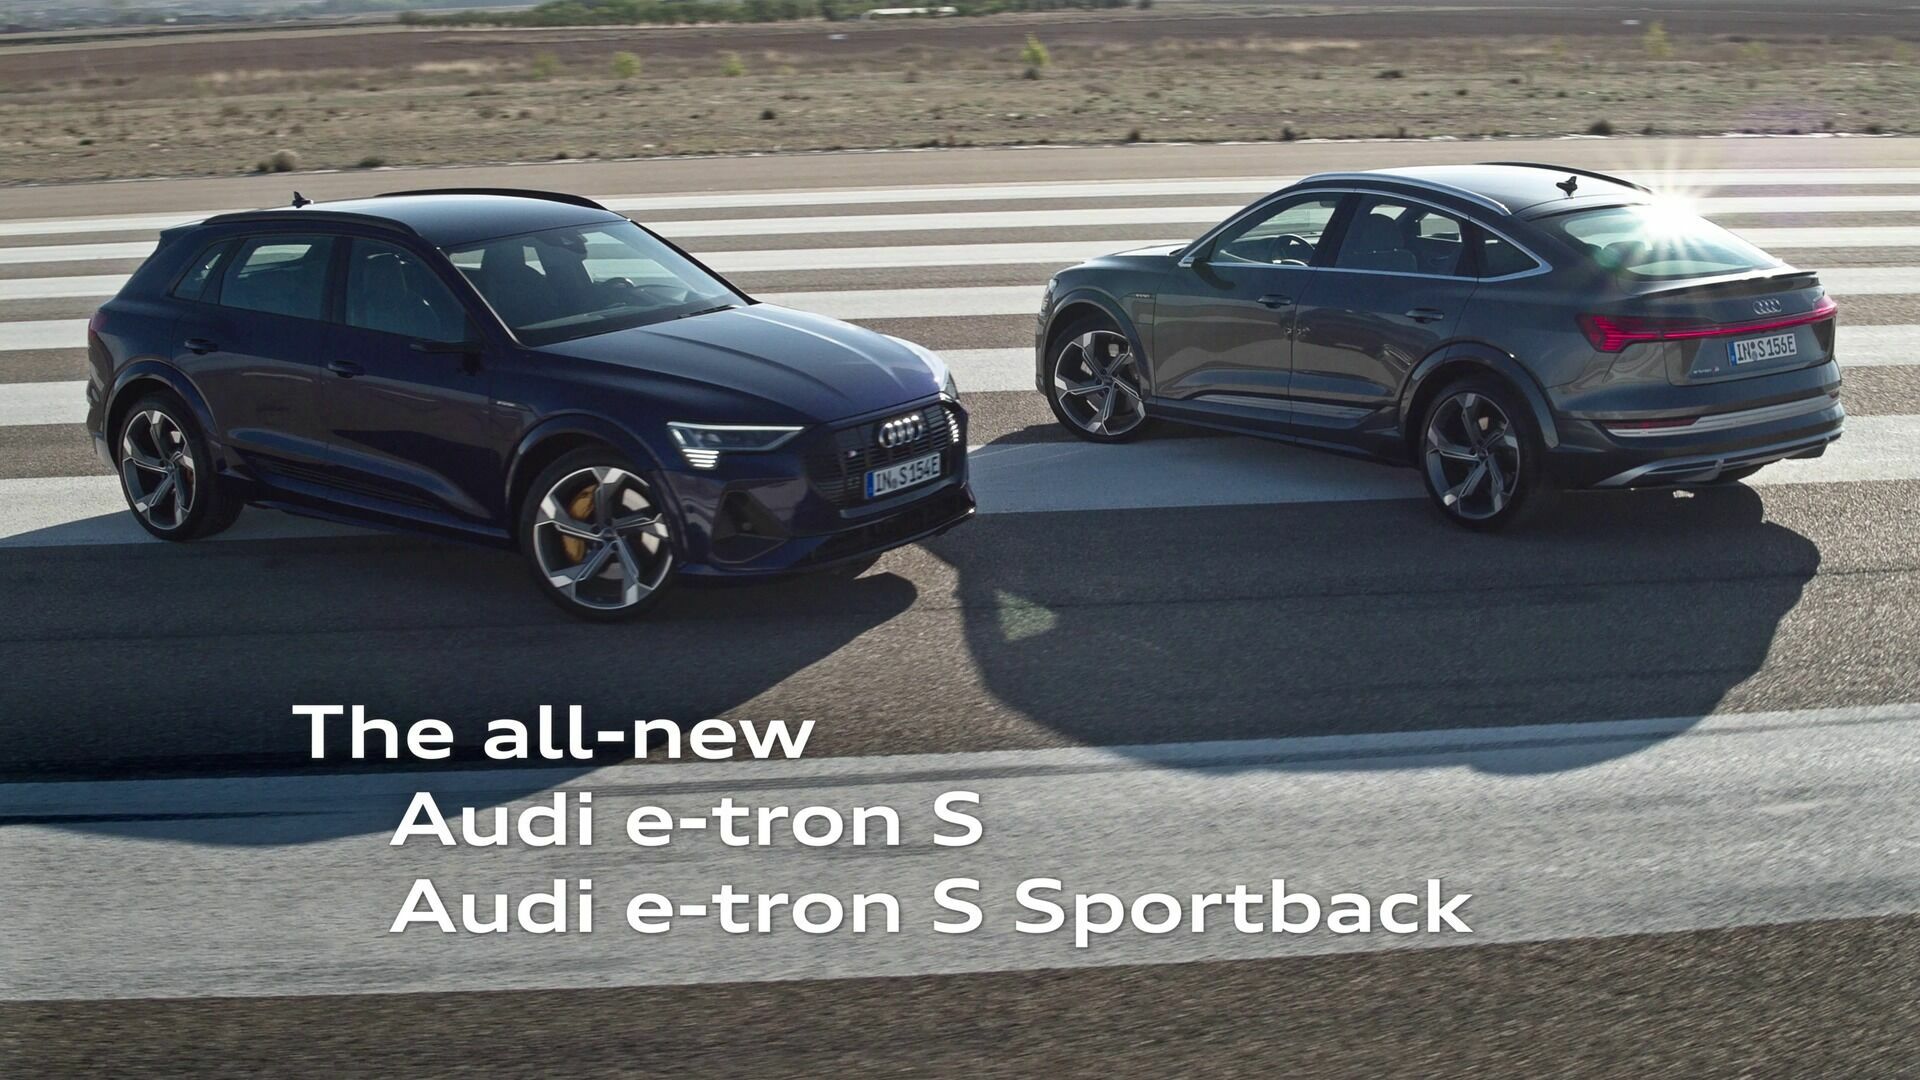 Consequently electric – the Audi e-tron S and Audi e-tron S Sportback